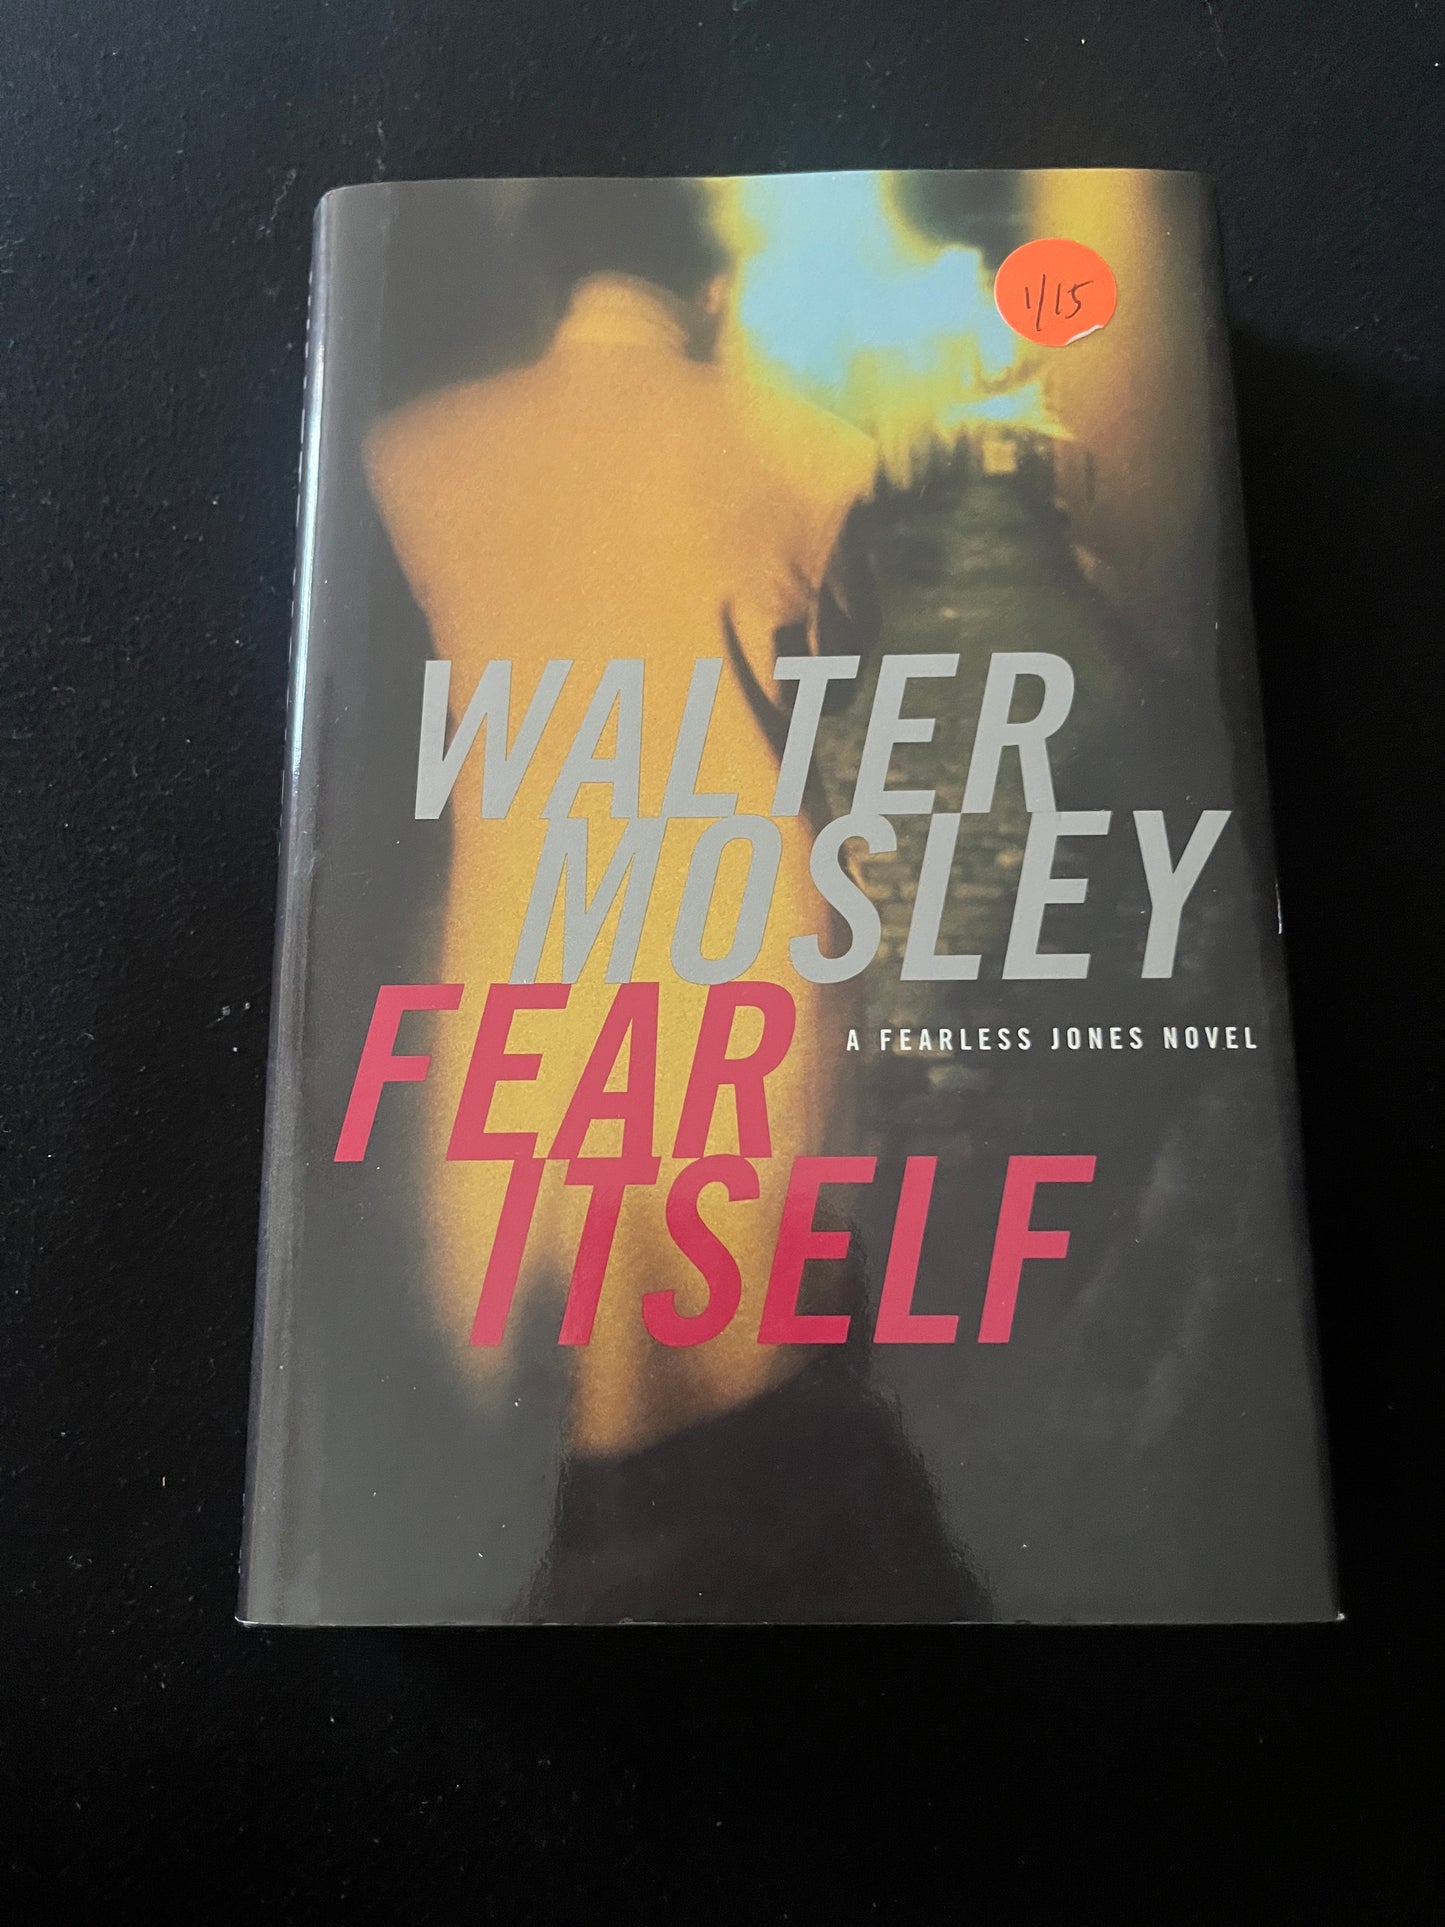 FEAR ITSELF by Walter Mosley